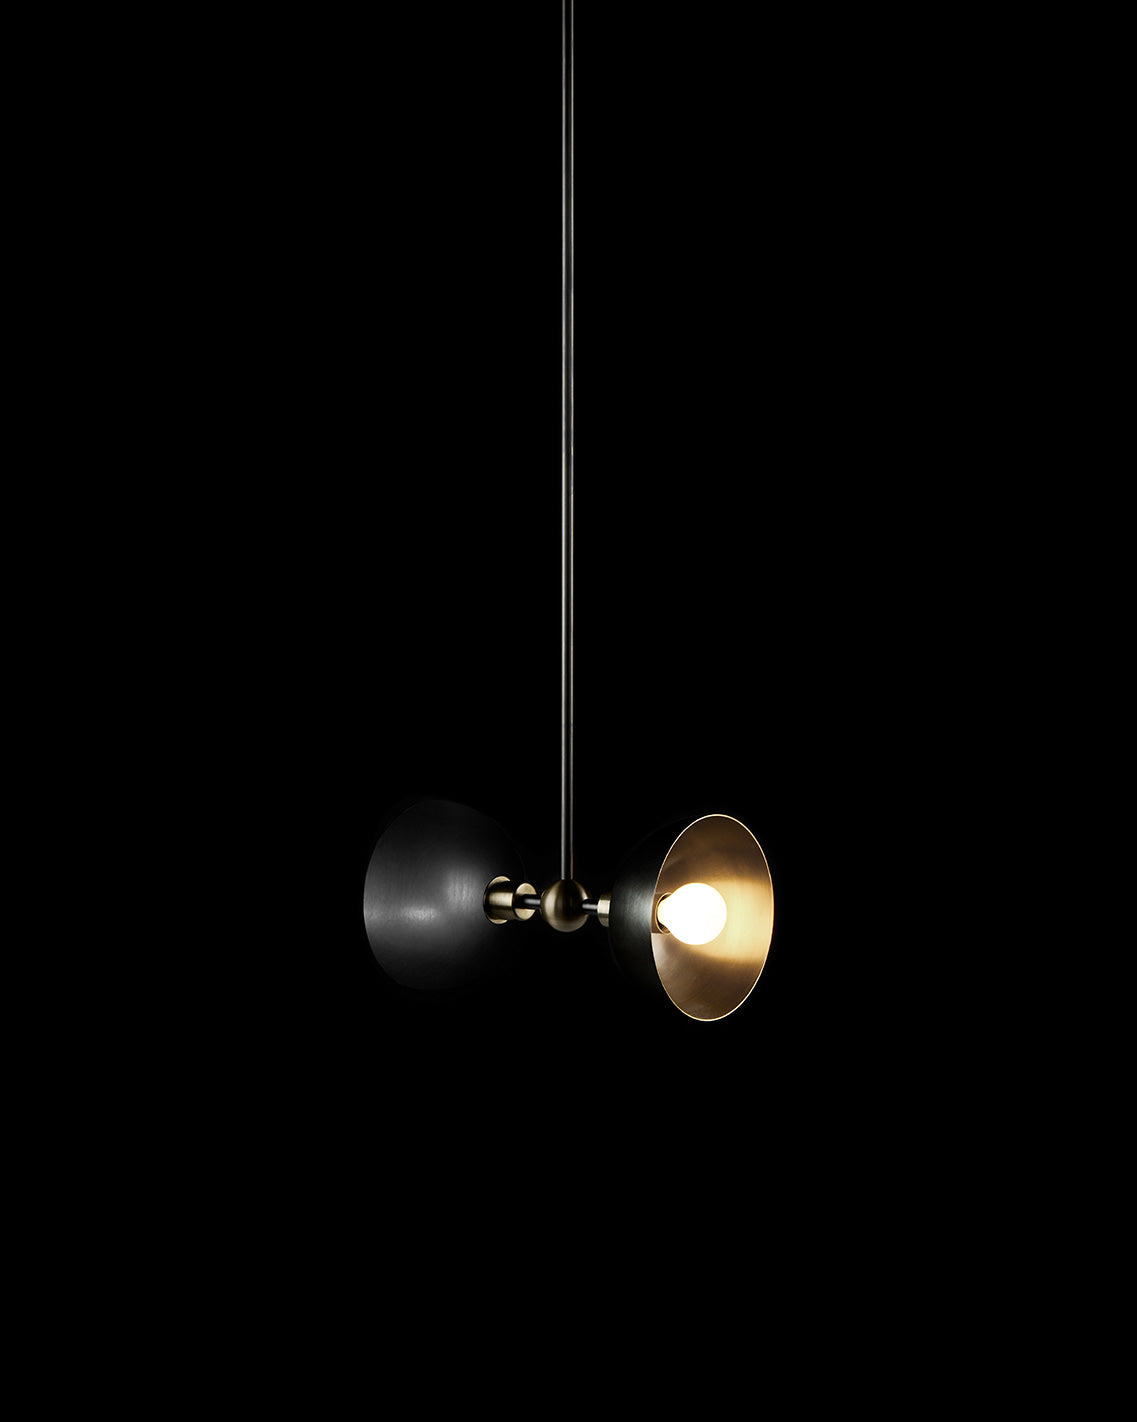 TRAPEZE : 2 ceiling pendant in Blackened Brass finish with Aged Brass bowls, hanging against a black background. 